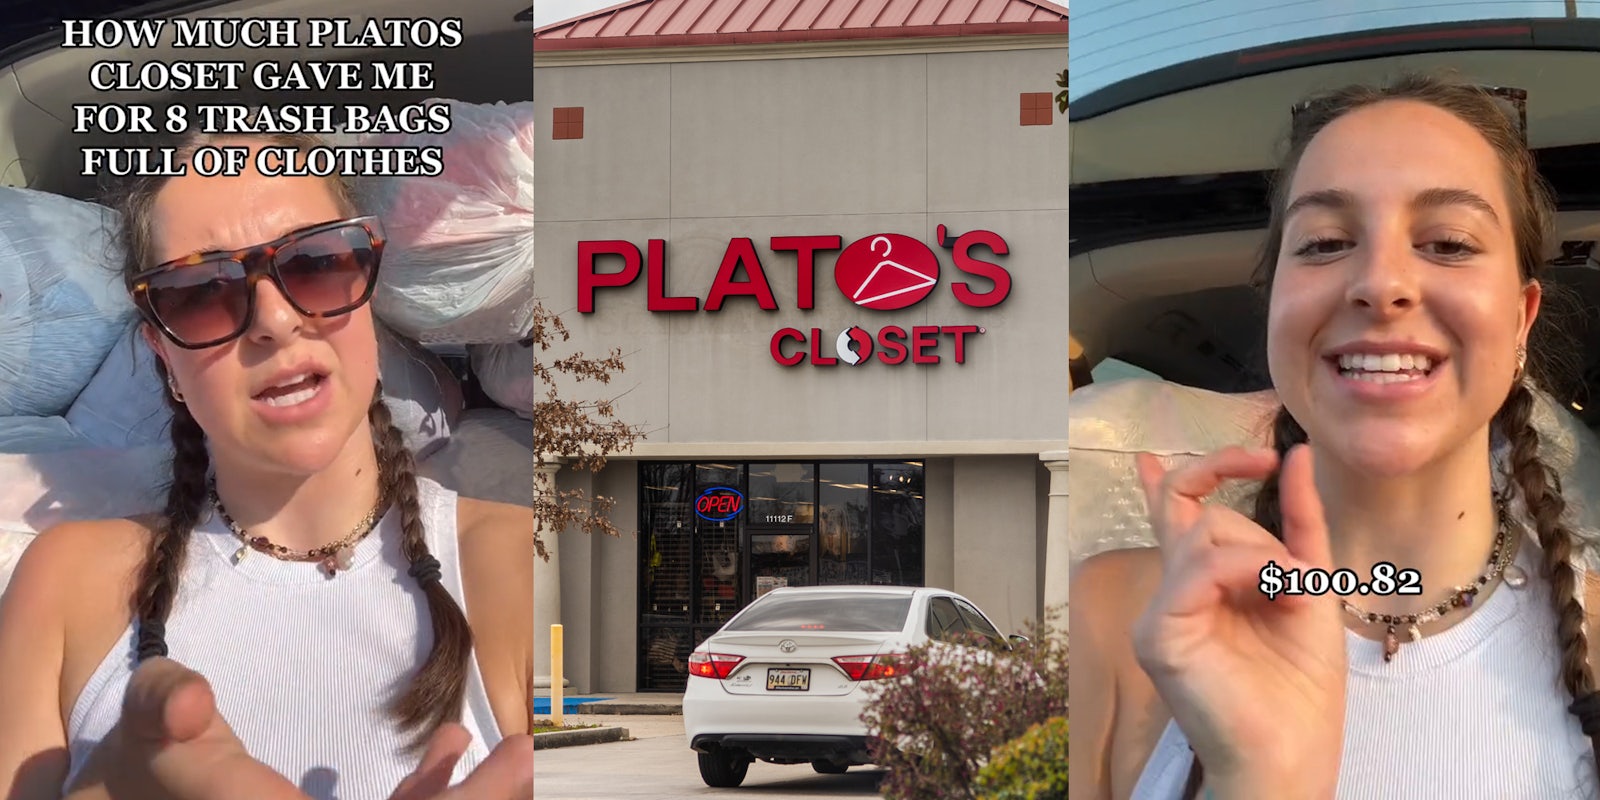 Plato's Closet customer speaking with caption 'HOW MUCH PLATOS CLOSET GAVE ME FOR 8 TRASH BAGS FULL OF CLOTHES' (l) Plato's Closet building with sign (c) Plato's Closet customer speaking with caption '$100.82' (r)